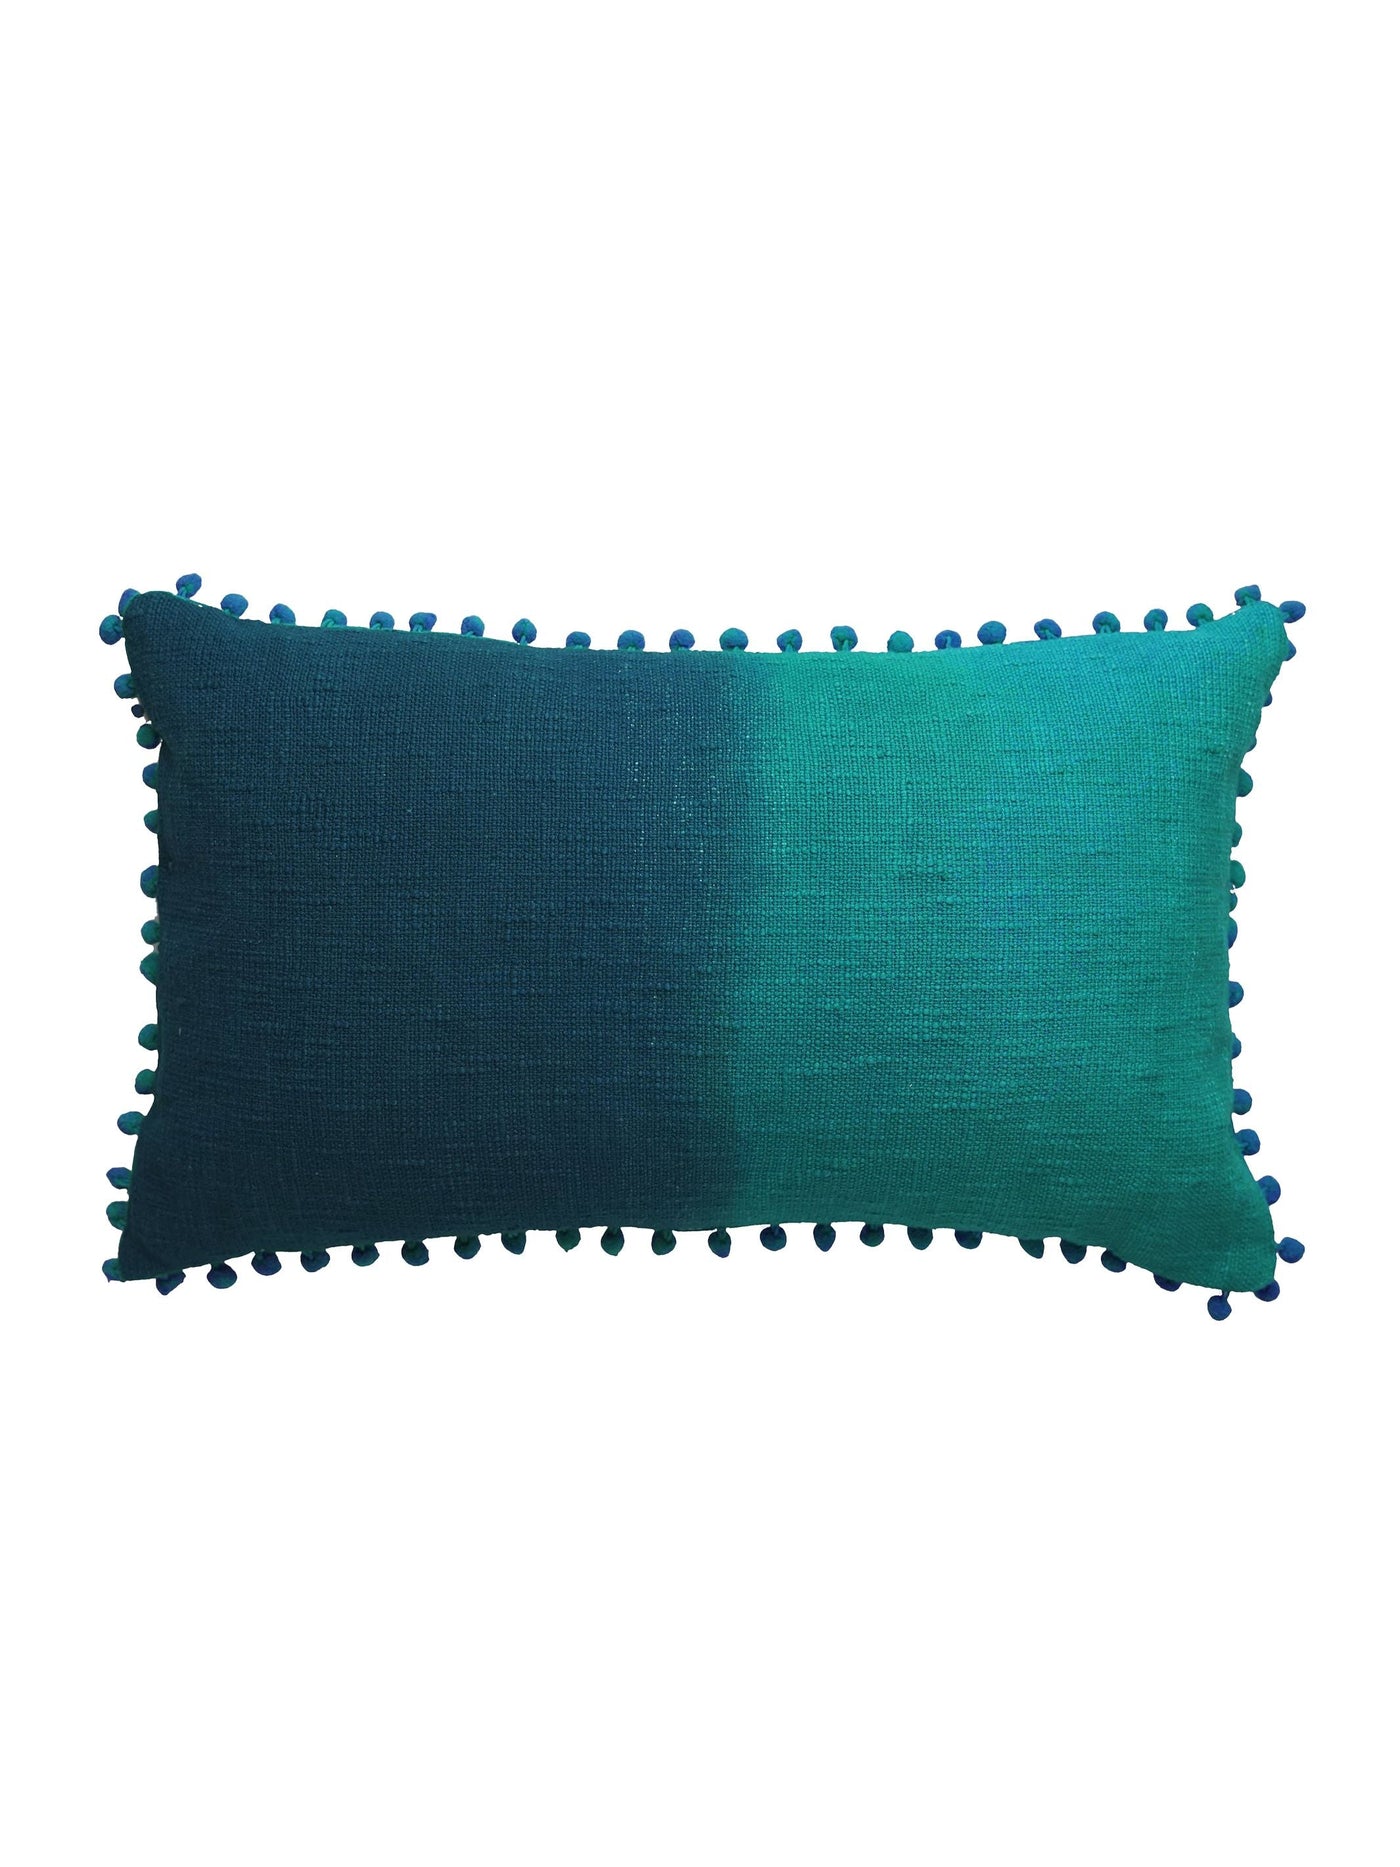 Ombre Cushion Cover - Harmony Turquoise